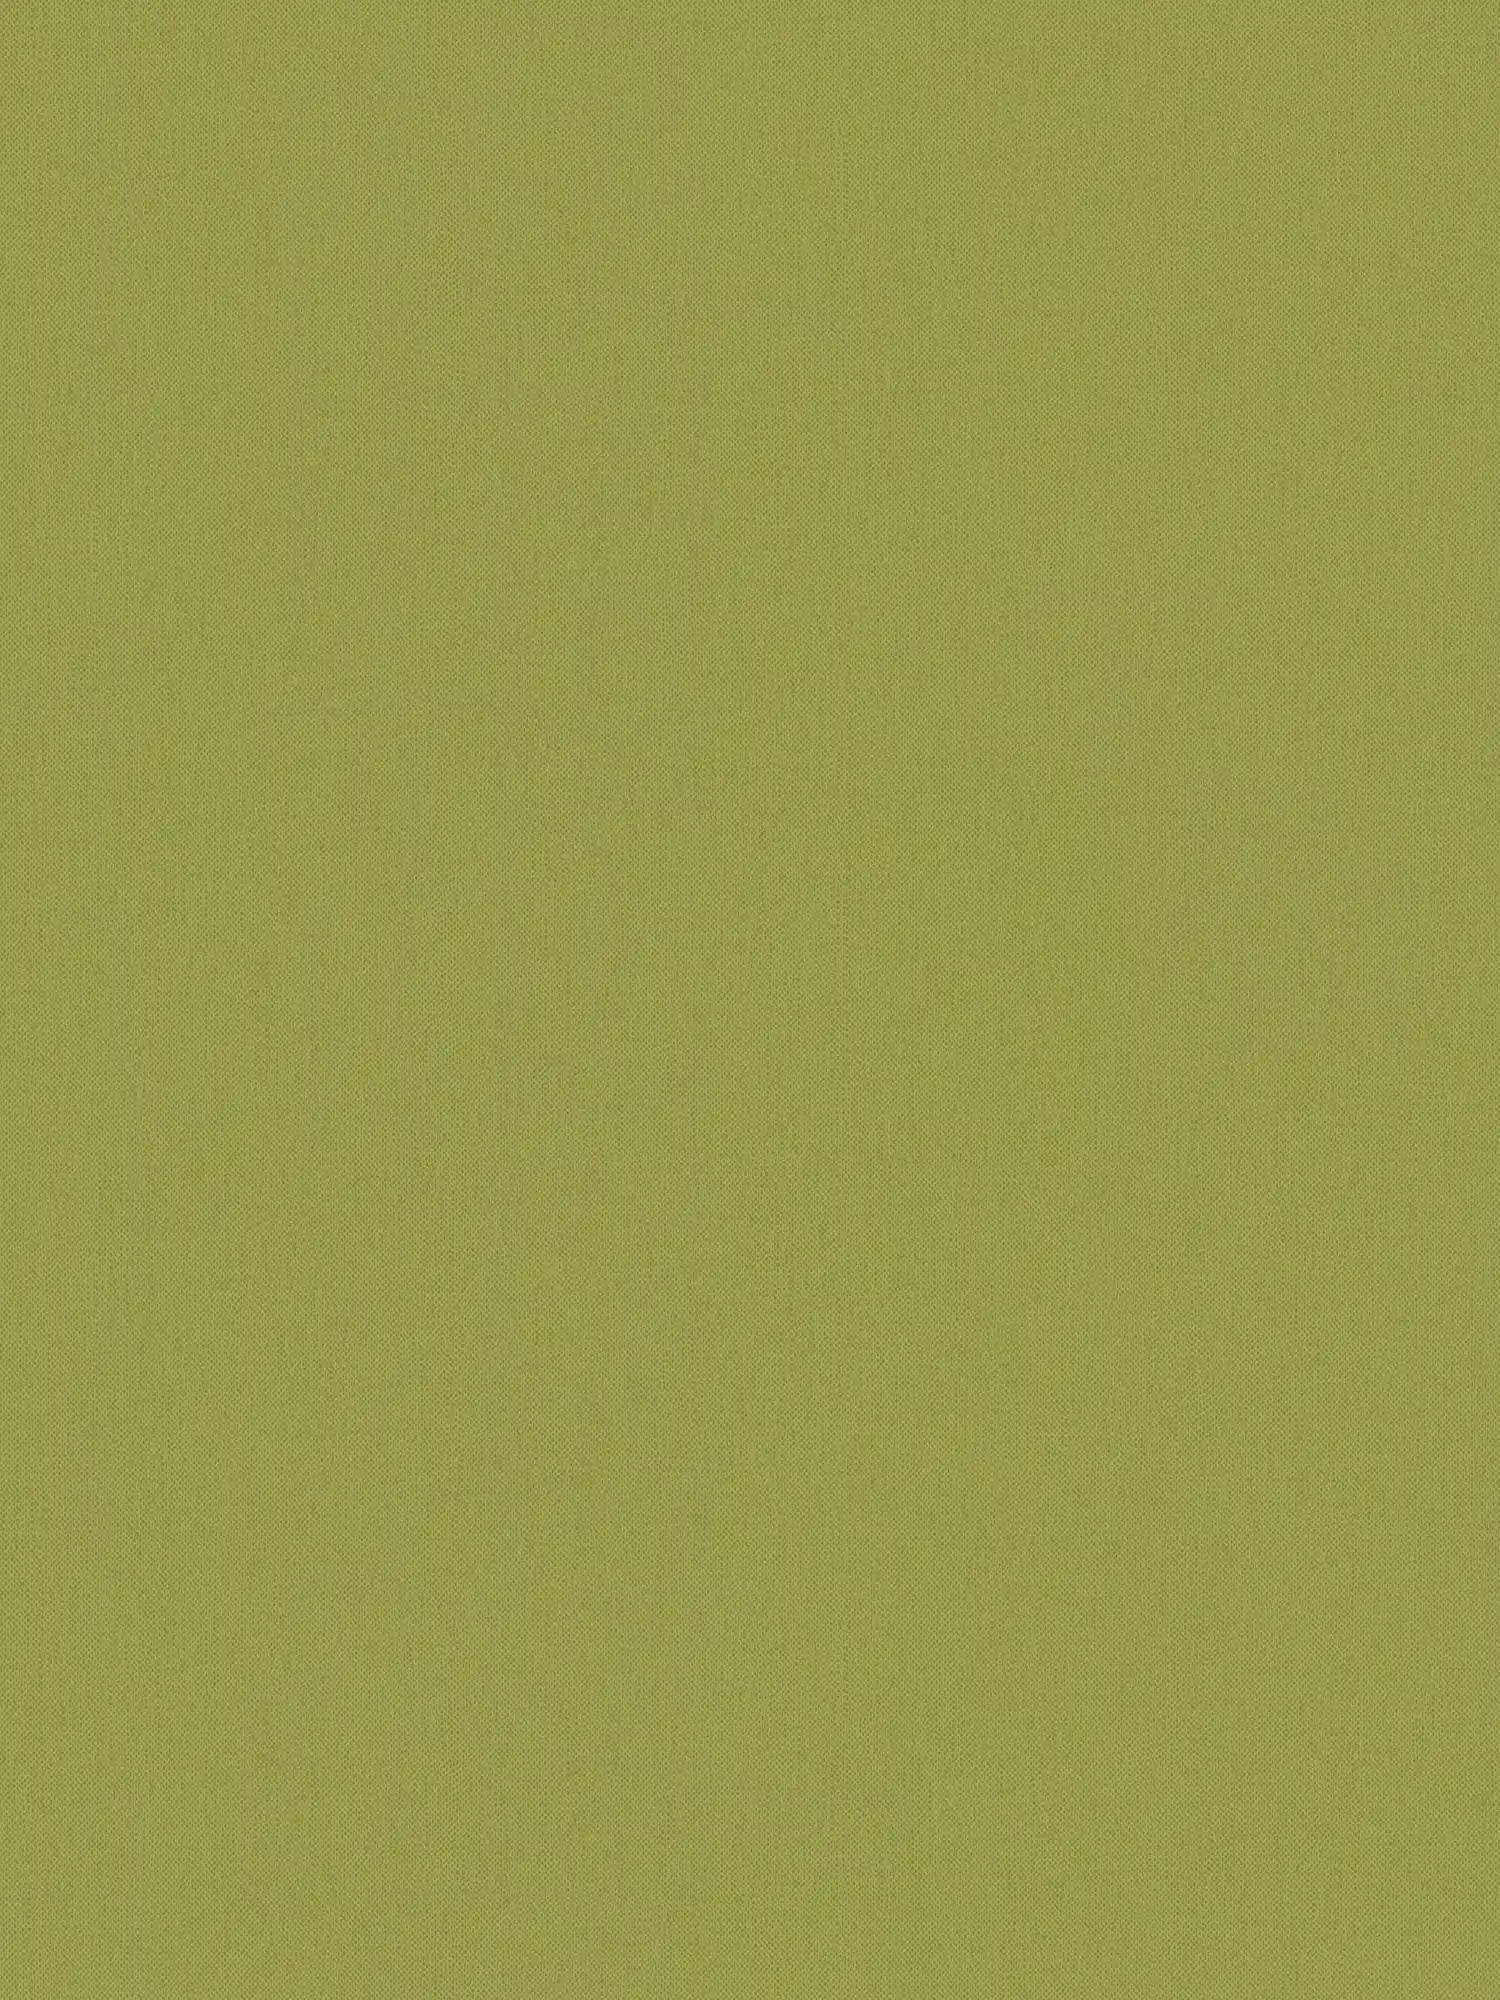 Wallpaper olive green with linen look & texture pattern - green, yellow
